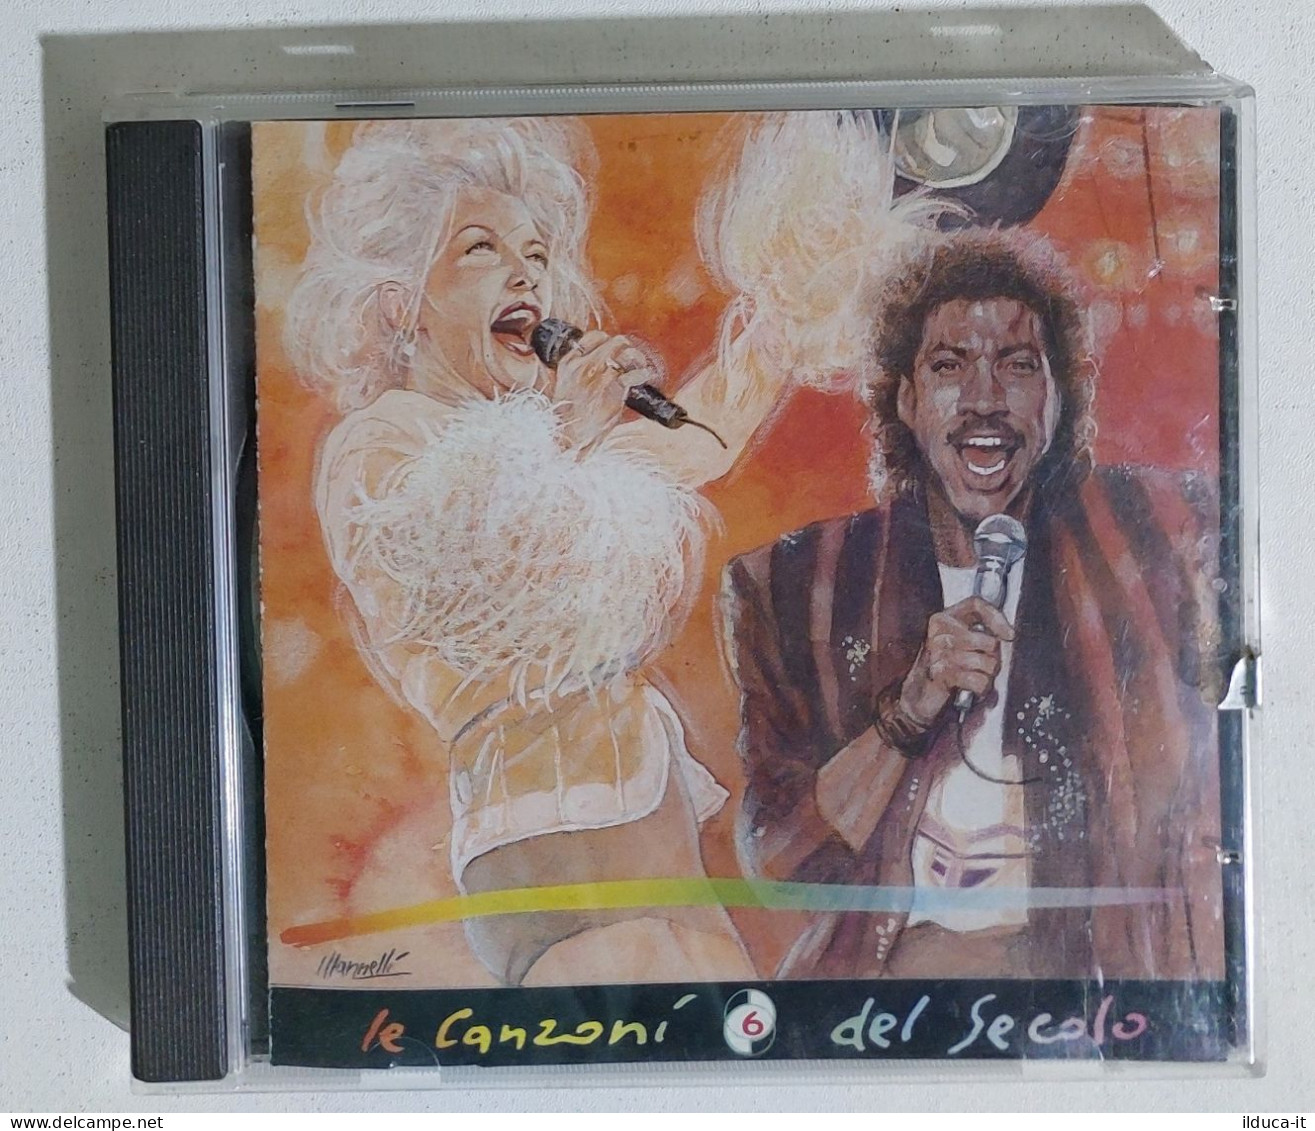 I113556 CD - Le Canzoni Del Secolo N. 6 - Lionel Richie; James Brown; Blood - Hit-Compilations